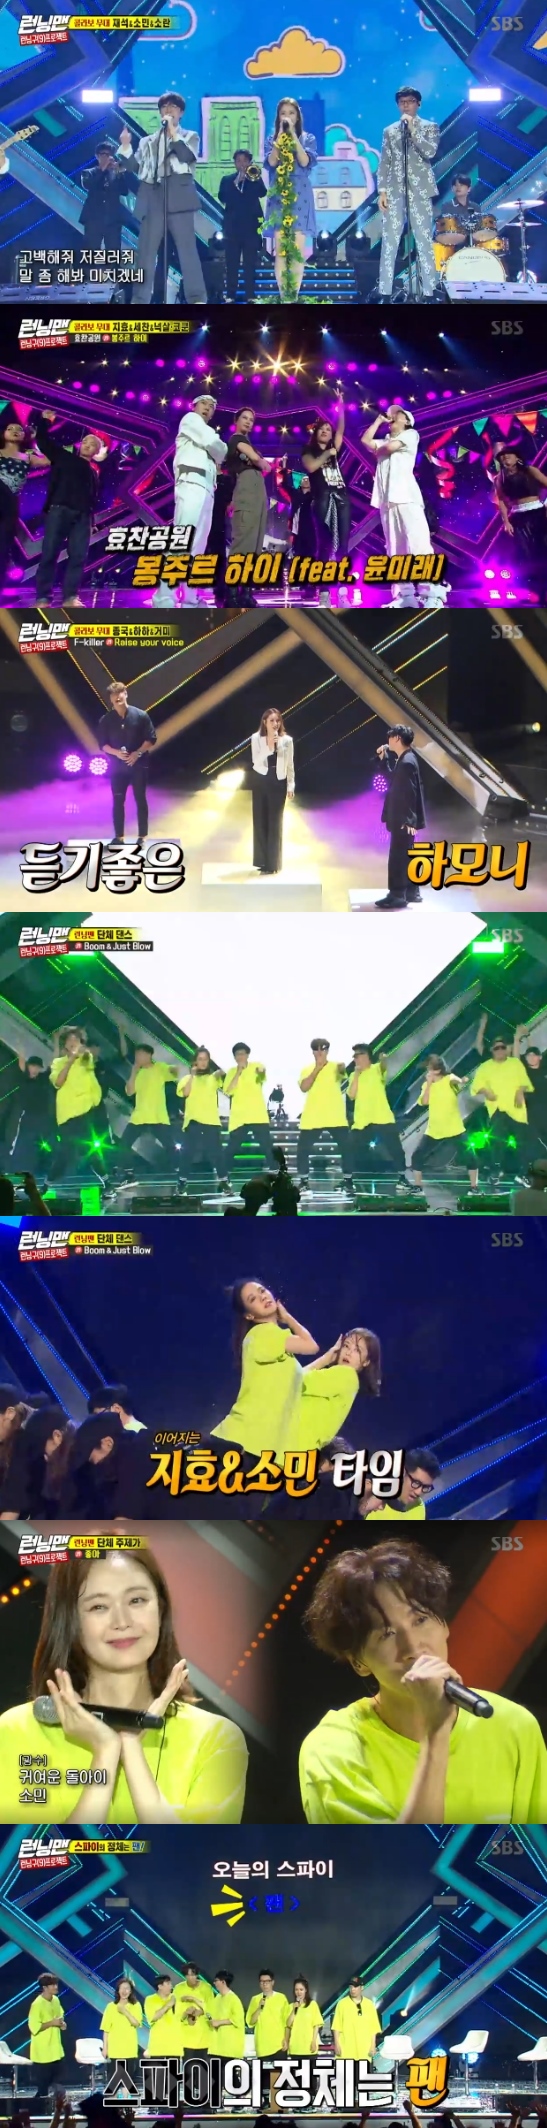 Running Man successfully completed the Nine-year anniversary commemorative fan meeting.On the 22nd SBS Good Sunday - Running Man, spider, Hong Jin Young, Nucksal, and Code Kunst set the stage.On this day, Hyochan Park (Song Ji-hyo, Yang Se-chan, Nuxal, and Kodkunst) set up a stage for collaboration with Bongjur High.The secret weapon at Hyochan Park was Yoon Mi-rae, who caught the stage at once with a tremendous presence.The following performances will be Come Out Confessions by Jeon So-Ran and Yoo Jae-Suk (Jeon So-min, So-Ran, Yoo Jae-Suk).It was a song with the heart of Jeon So-min waiting for Confessions: Yoo Jae-Suk said, Its scary because it feels like delivering a message on behalf of Somin.Its too direct, he laughed, but Ko Young-bae said, Jeon So-min is a genius if you look at the lyrics.The staged fire and Yoo Jae-Suk attracted attention with their cute and exciting stage.Spiders, Kim Jong-kook and Haha formed F - Killer (fan killer).Haha mentioned the conversation between the cockpit and the spider and said, If you do, Ill rap. The three people kissed with Raise your voice.In the song of the spider, A Pink Jung Eunji said, It seems that the light falls only over the head of the spider. He also admired I want to sing like that once.All members then showed a group dance, which was a stage where the members efforts were fully filled.Kim Jong-kook and Jeon So-mins high-level lifting also made it clean, and Song Ji-hyo and Jeon So-mins two-top dance, date-sized and jump dance were also perfect.The choreographer Ri A-kim was also content and wept.After the stage, the members encouraged each other, and Song Ji-hyo could not speak in a hearty mind.Song Ji-hyo pressed a word he wanted to say and said thank you; Lee Kwang-soos turn to say hello.My brother is not a fool, he shouted in the audience, laughing. Yoo Jae-Suk also said, Its not a lunatic. Give me a lot of rumors.As Lee Kwang-soos words lengthen, Yoo Jae-Suk even orders to stop the comment quickly.After the group theme Like ended, the members began to guess Spy.Yoo Jae-Suk, Lee Kwang-soo and Yang Se-chan suspected each other, pointing to Ji Suk-jin, but Spy was a fan.Haha, Song Ji-hyo, Lee Kwang-soo and Jeon So-min are facing fresh cream penalties.Photo = SBS Broadcasting Screen